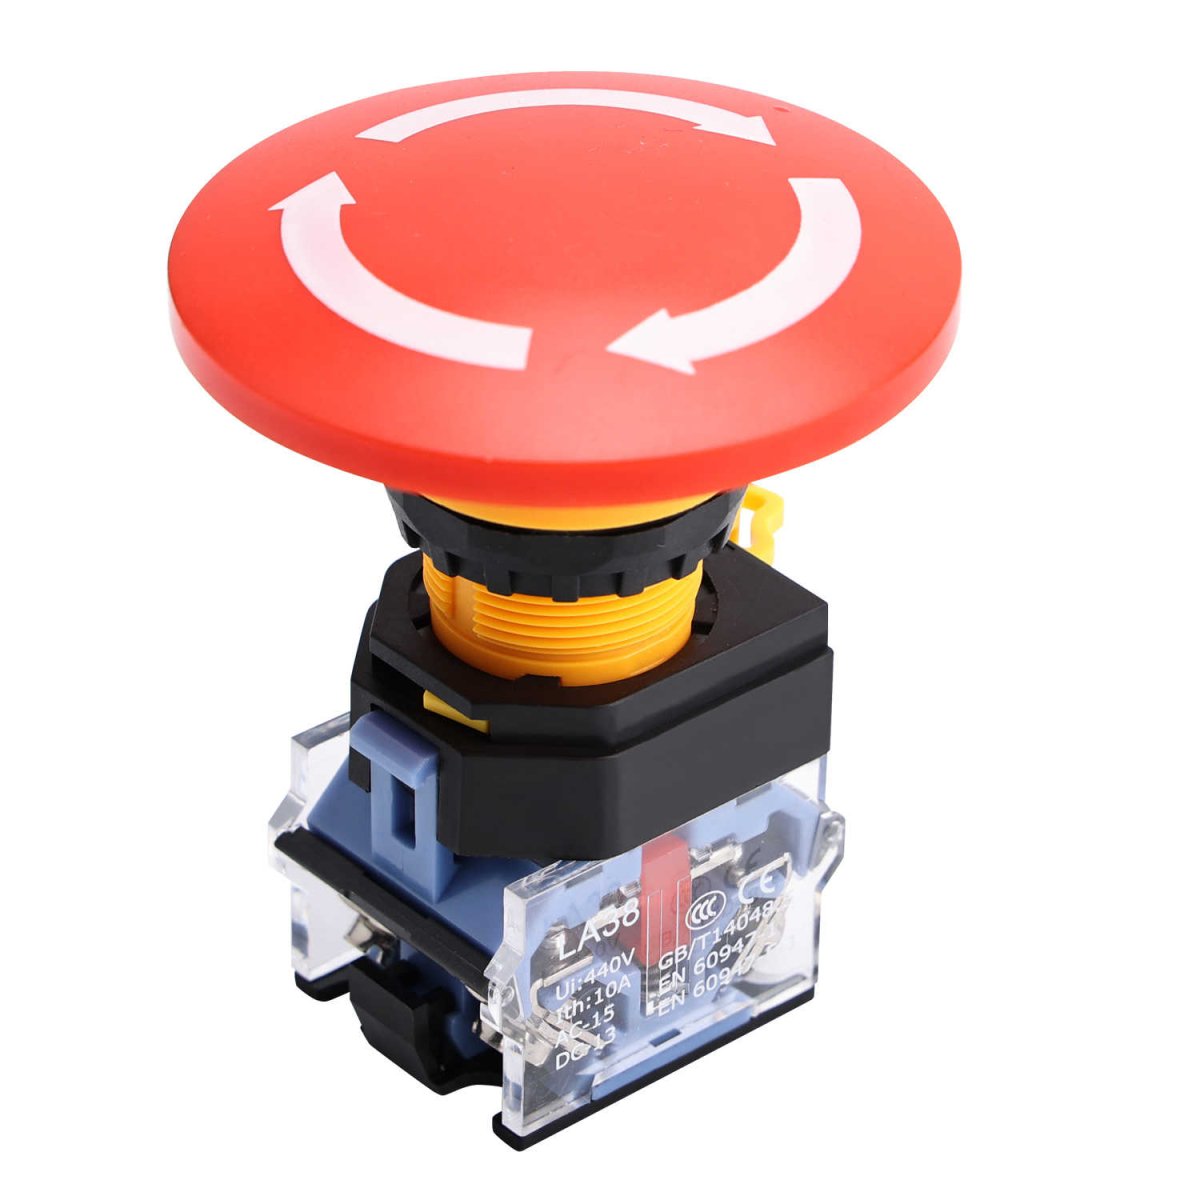 22mm Red Mushroom Emergency Stop Push Button Switch 440V 10Amp - Type C-